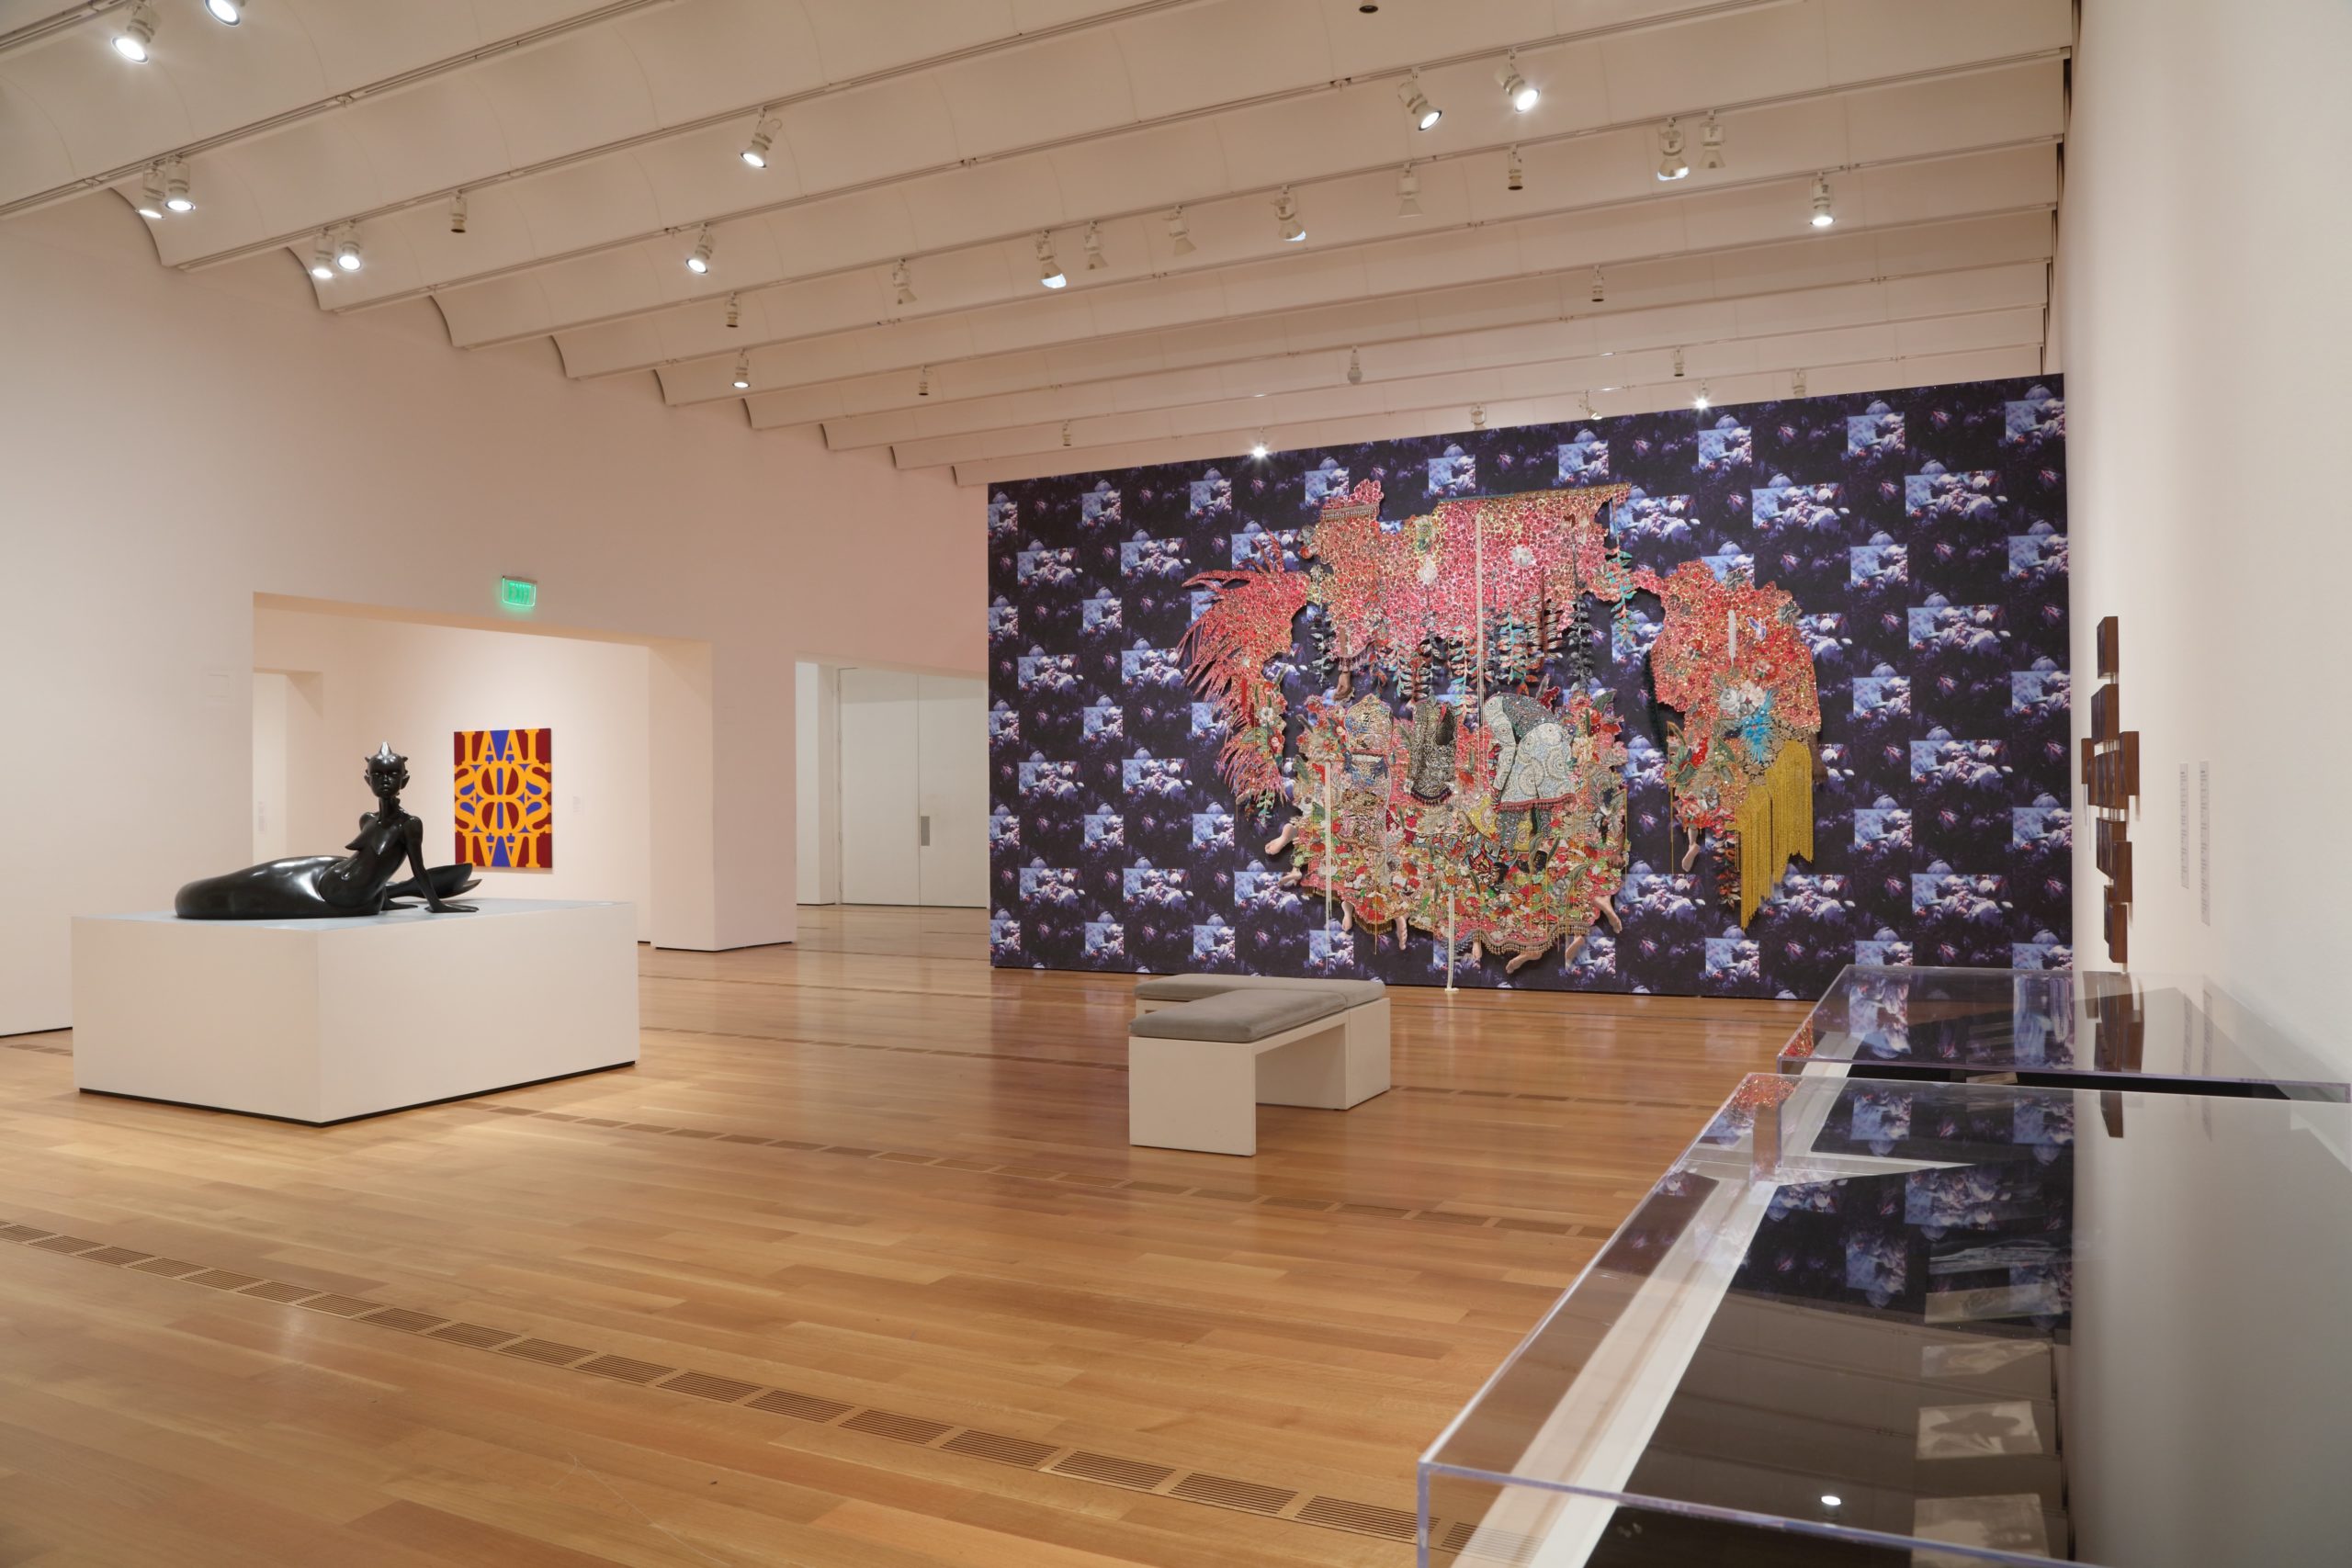 A large, open room with several works of art in it. On the left a mermaid sculpture in visible, with a graphic far behind it. In the center of the view is a wall with graphic art on it.